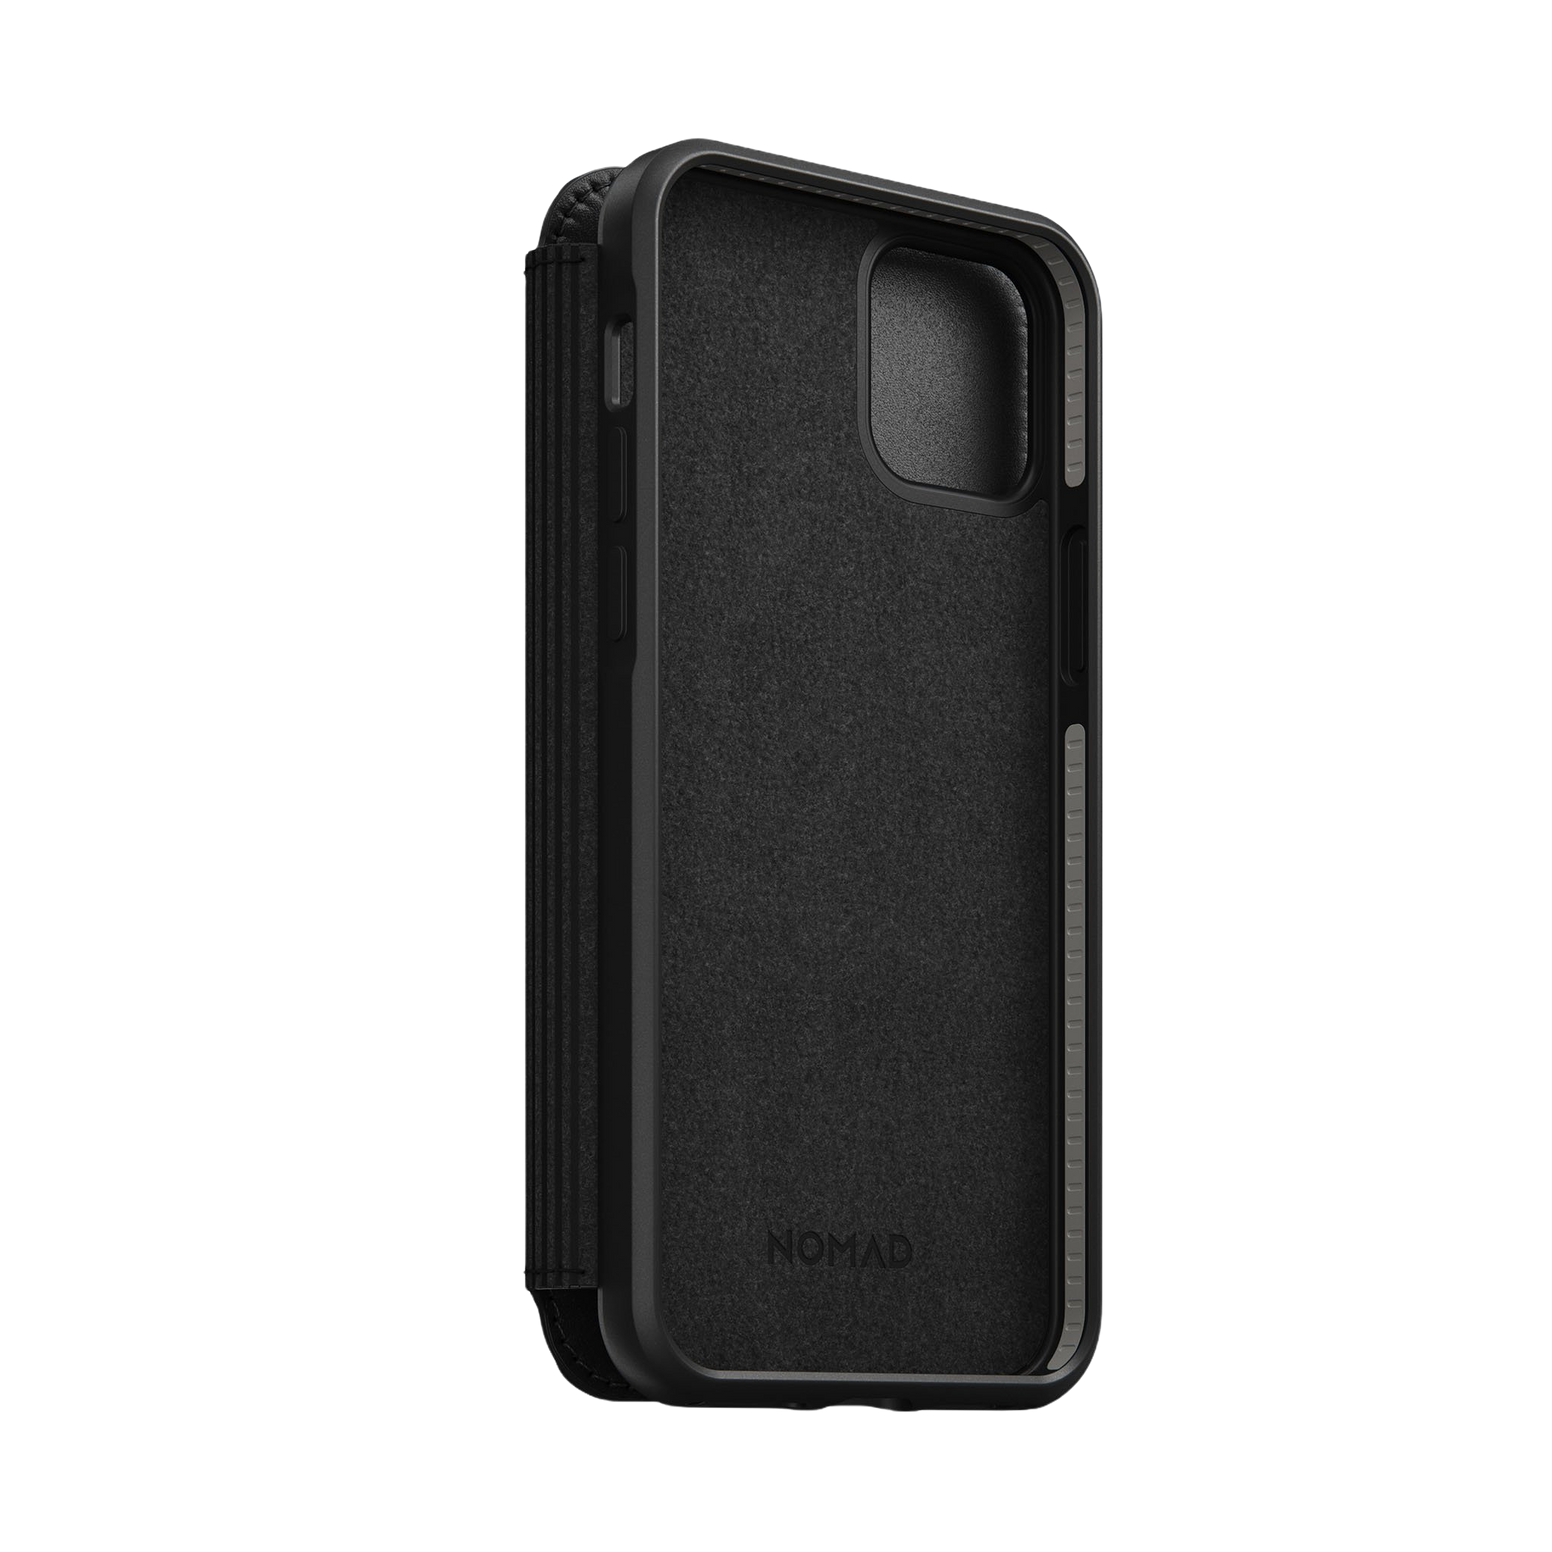 Nomad Rugged Folio with Horween Leather for iPhone 12 (6.1") - Black - Discontinued